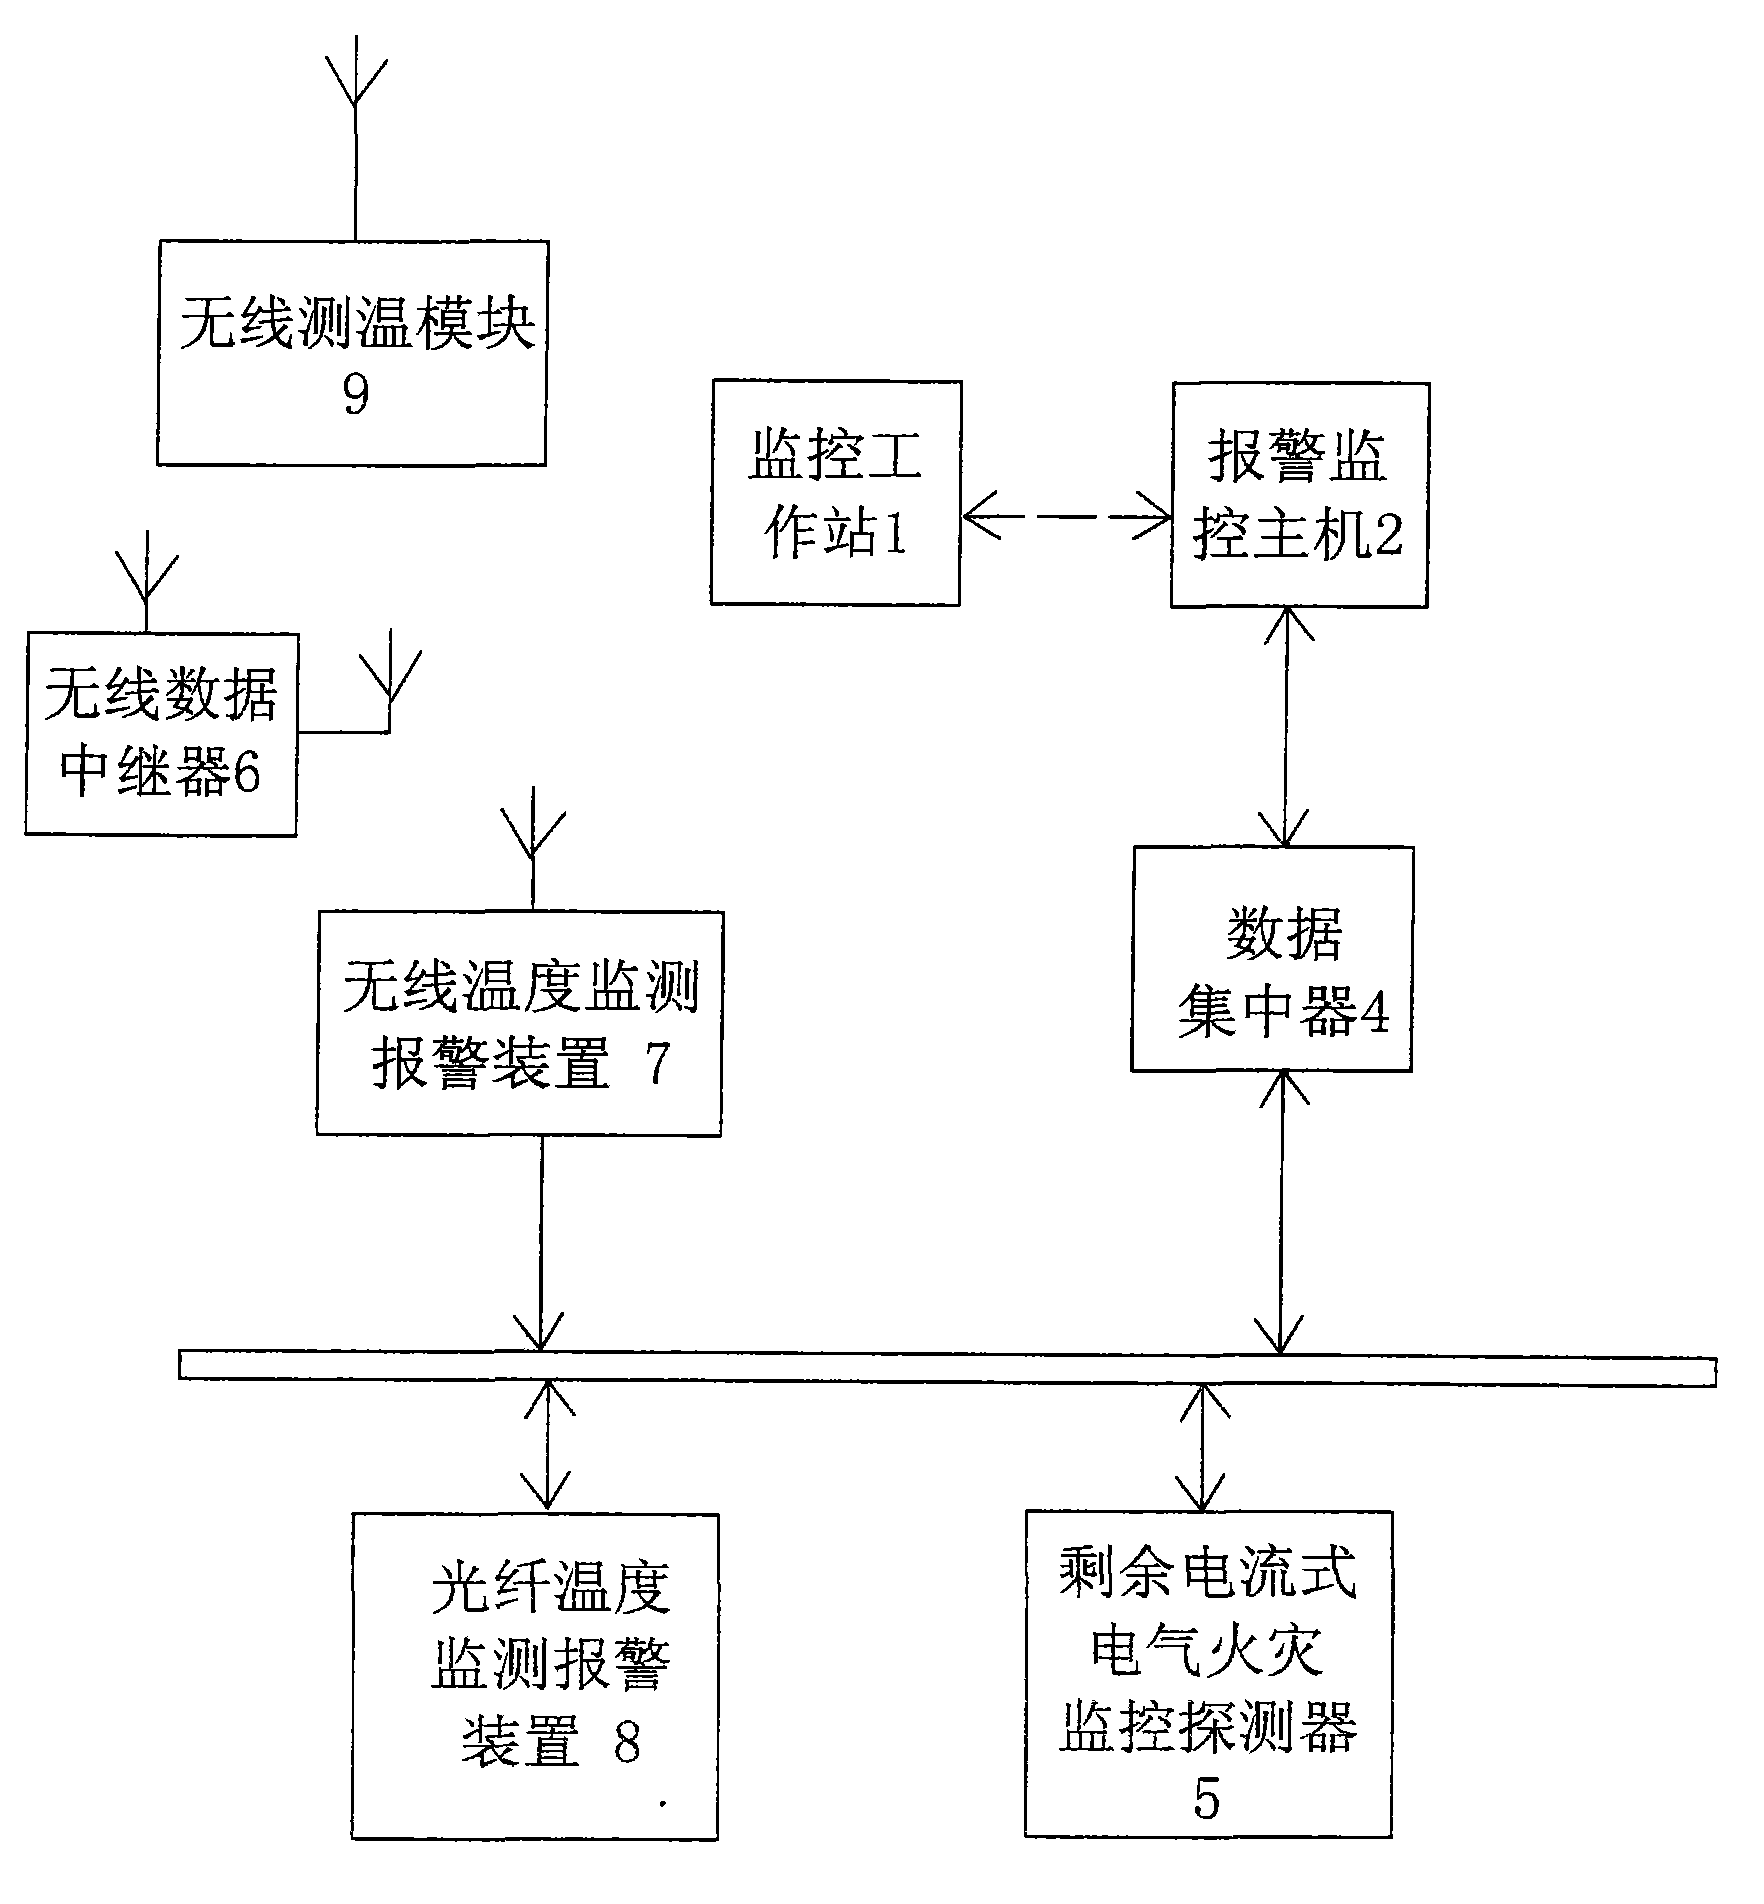 Temperature measuring type electrical fire monitoring system